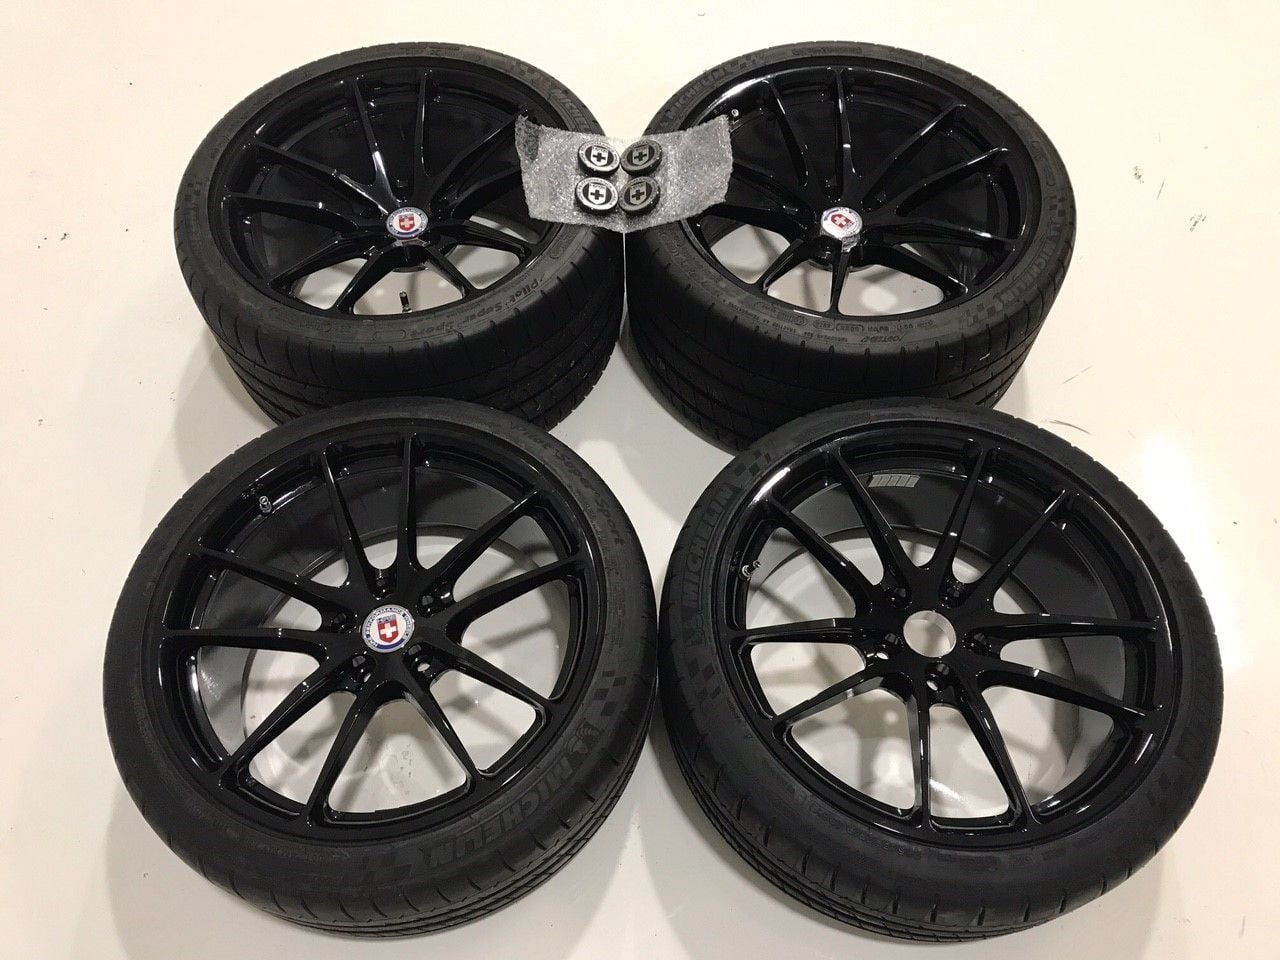 Wheels and Tires/Axles - 19"HRE P104's Wheels with Michelin Pilot Super Sports for sale. $6500! - Used - 2014 Mercedes-Benz CLS63 AMG S - McKinney, TX 75069, United States